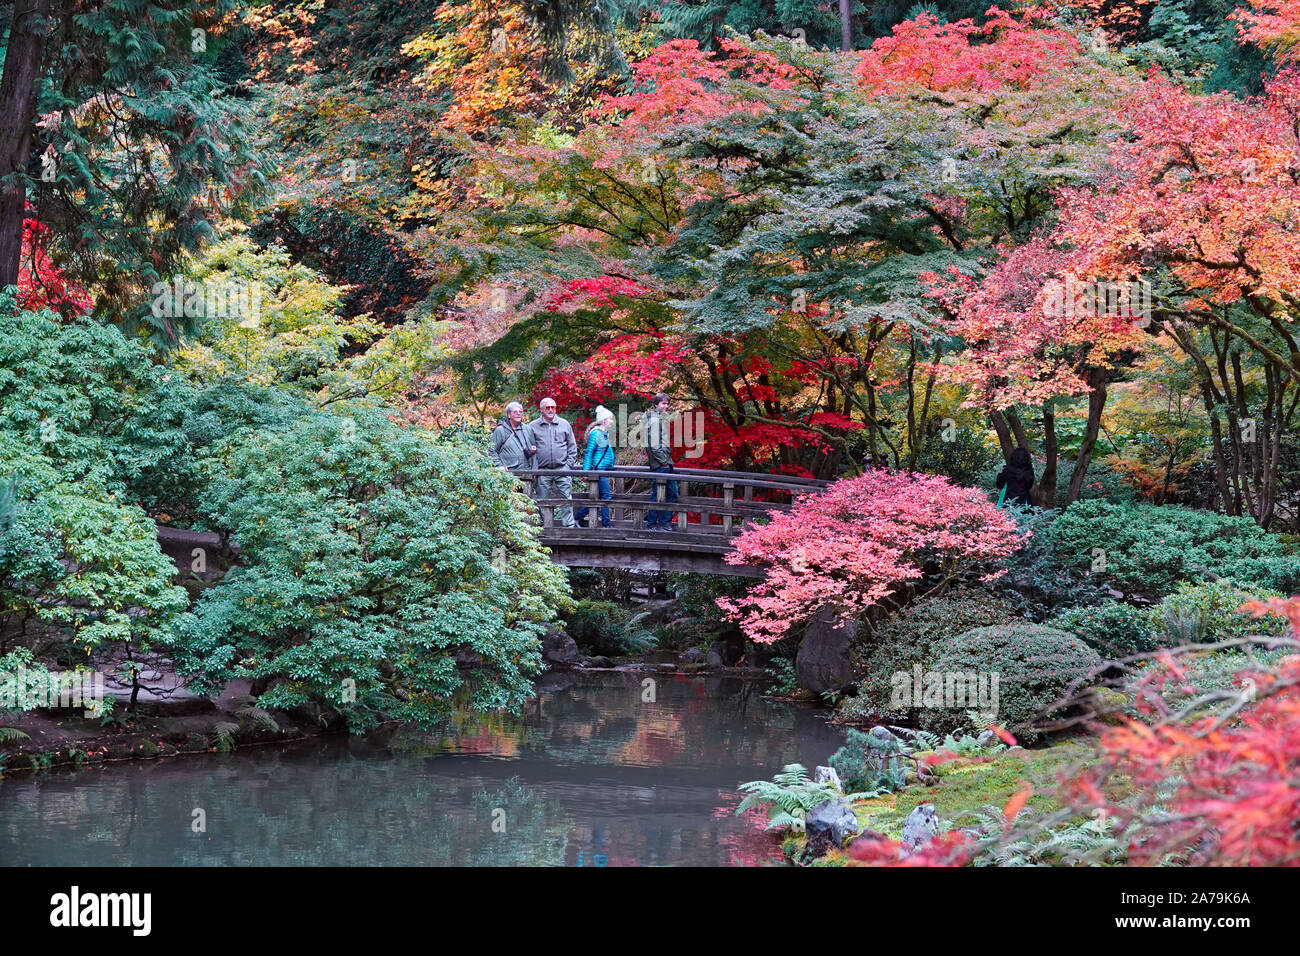 Maple trees and other exotic deciduous trees turning yellow and red in the world famous Japanese Gardens in Portland, Oregon, in Autumn. Stock Photo